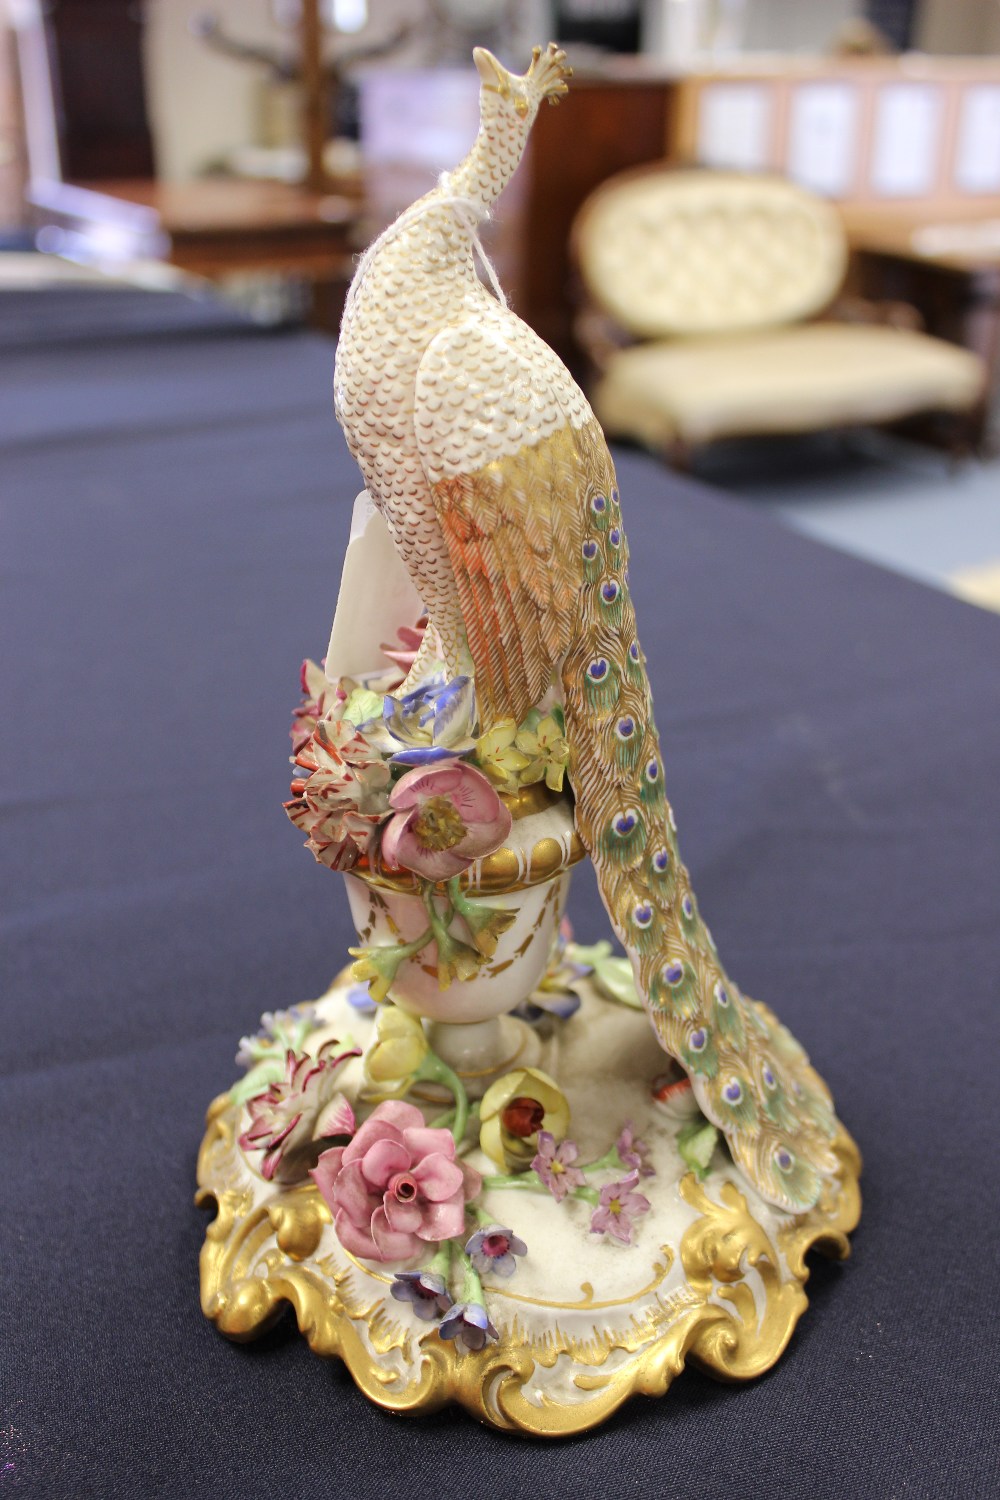 A Royal Crown Derby model of a peacock, standing on a floral encrusted urn, spreading circular